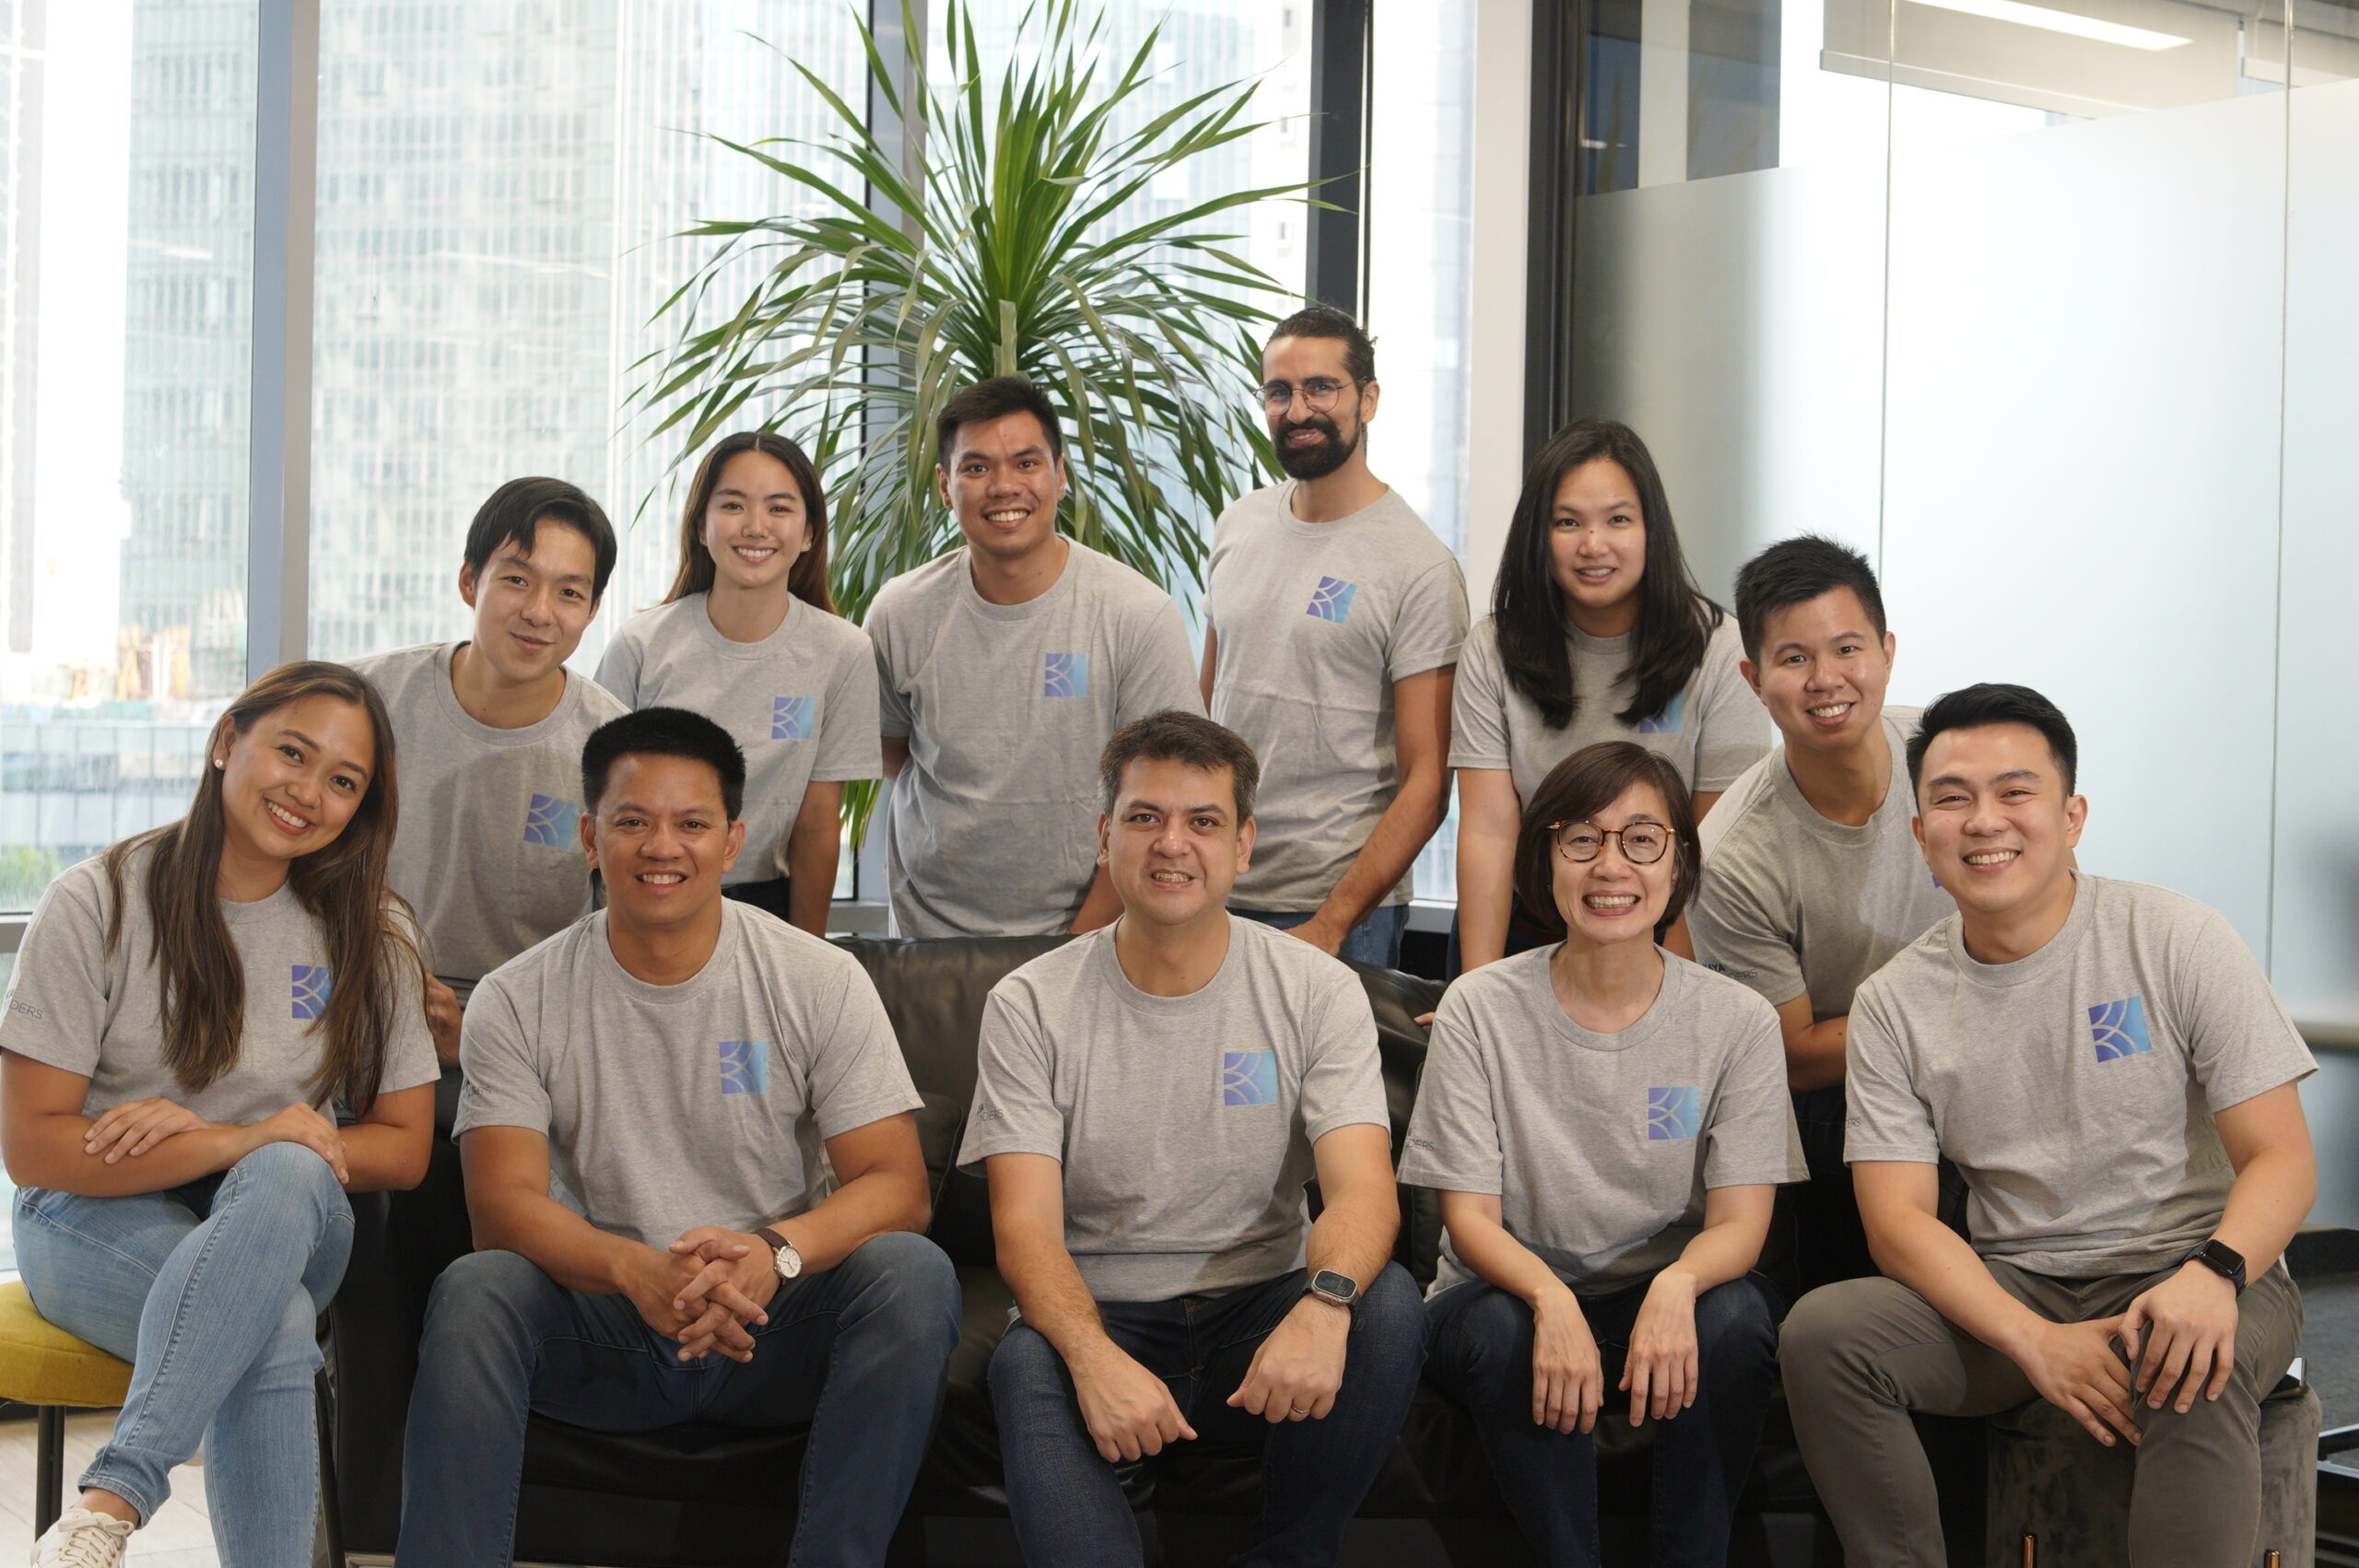 PH-based venture investor Kaya Founders hits $12m first close of latest funds